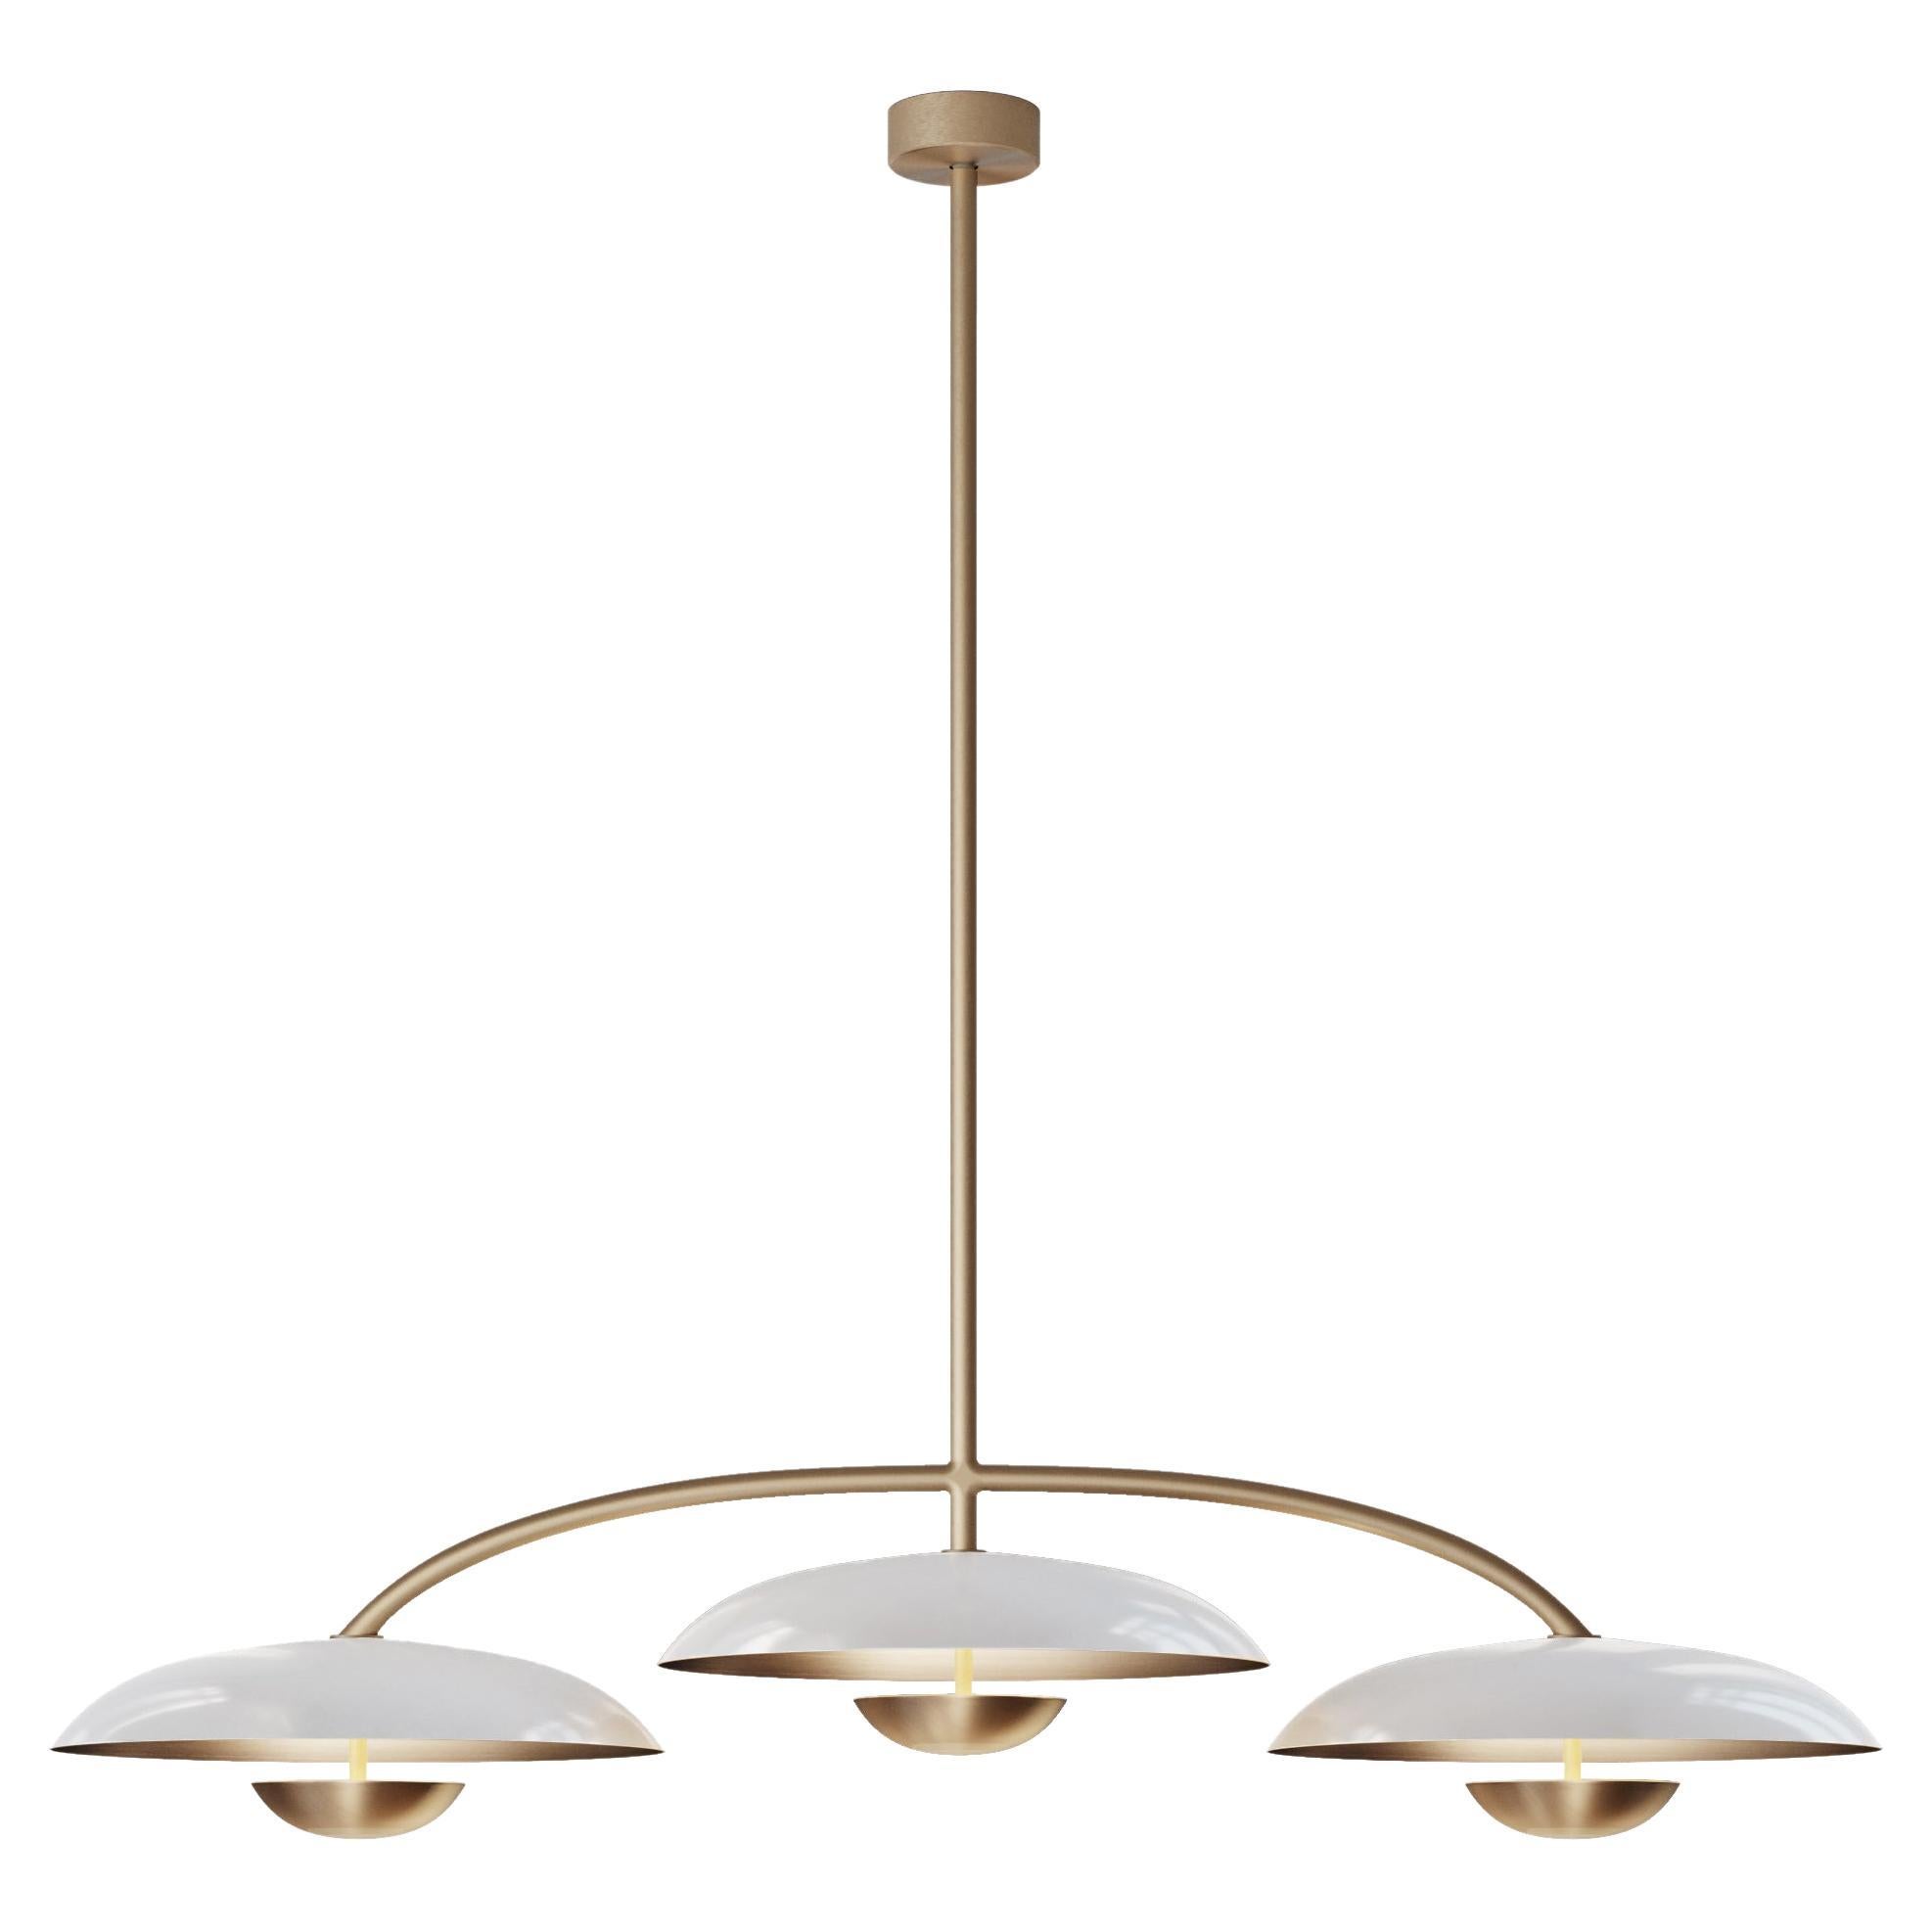 'Orbit Trio Purion' Handmade Piano Lacquered Brass Ceiling Light For Sale